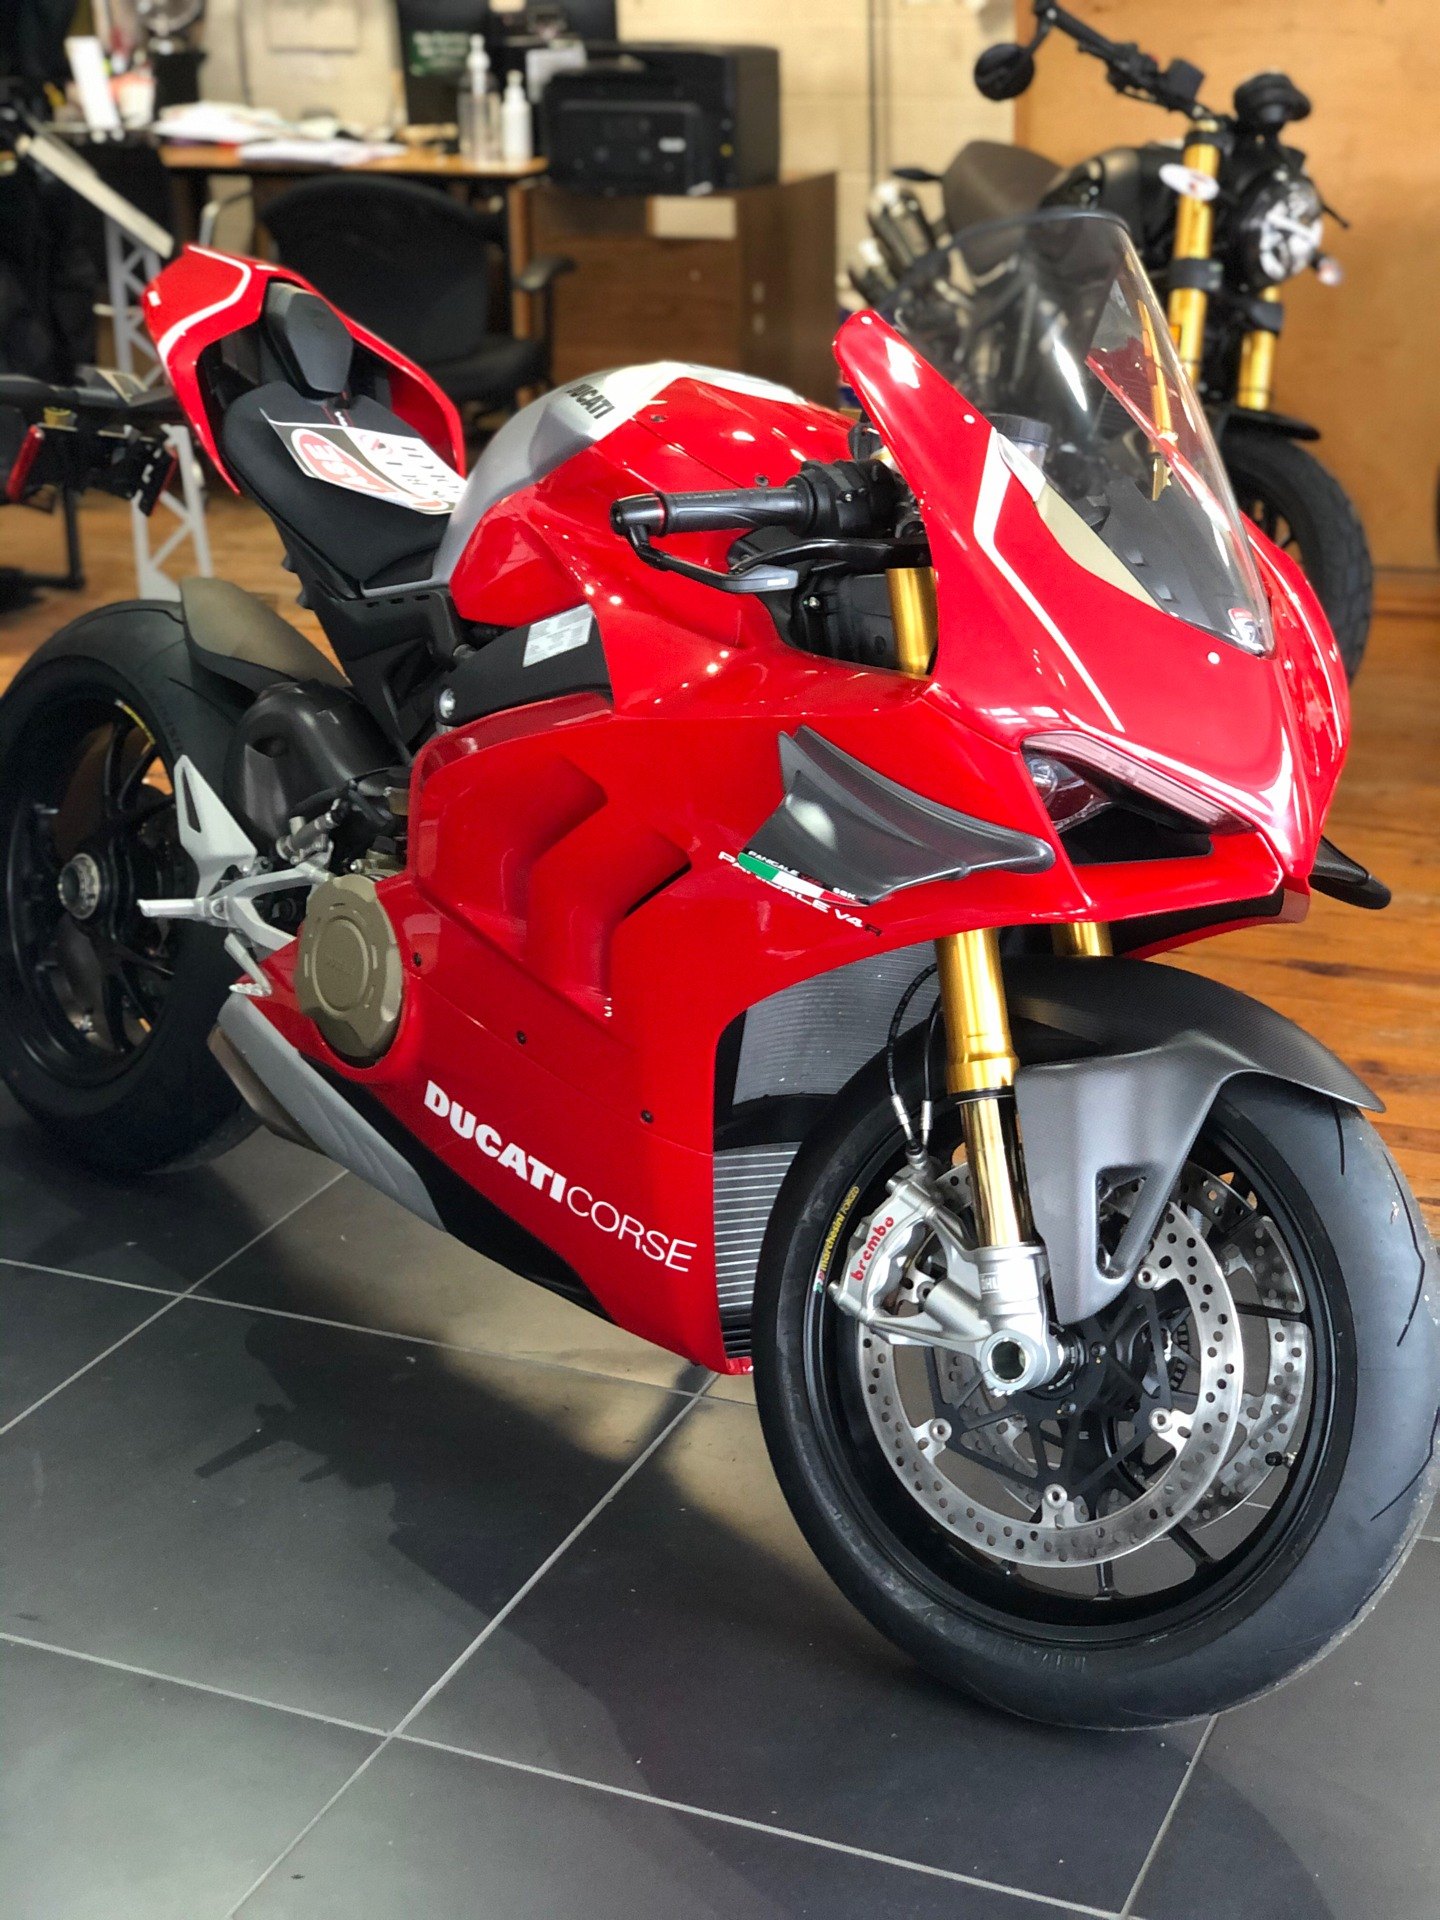 Used 2019 Ducati Panigale V4 R Motorcycles In Fort Montgomery Ny Stock Number 009134